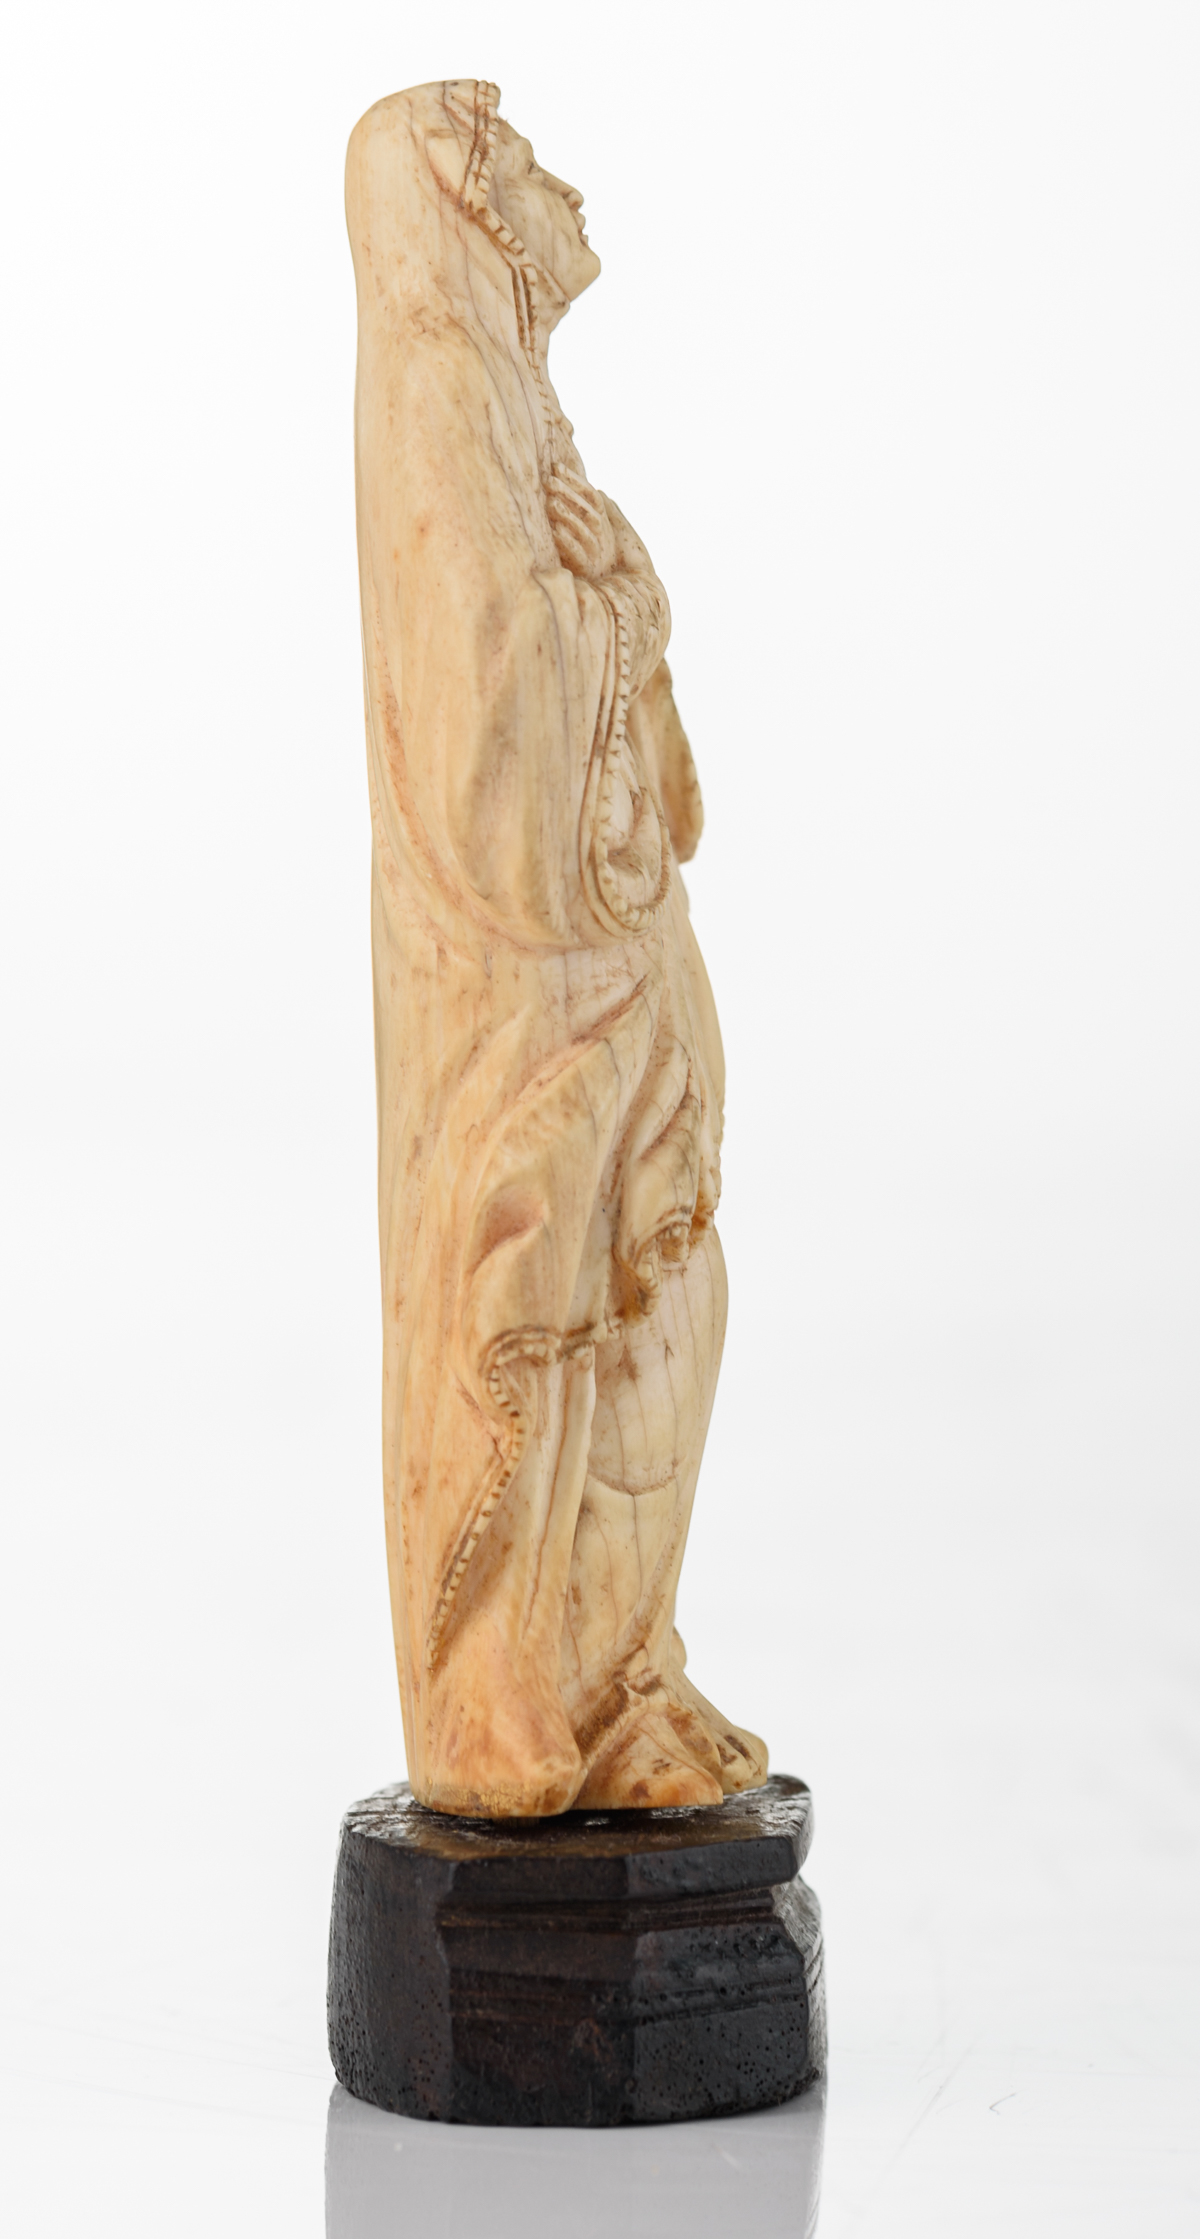 A probably Dieppe ivory sculpture depicting the mourning Holy Mother, 18th/19thC, H 11 - 12,5 cm ( - Image 4 of 6